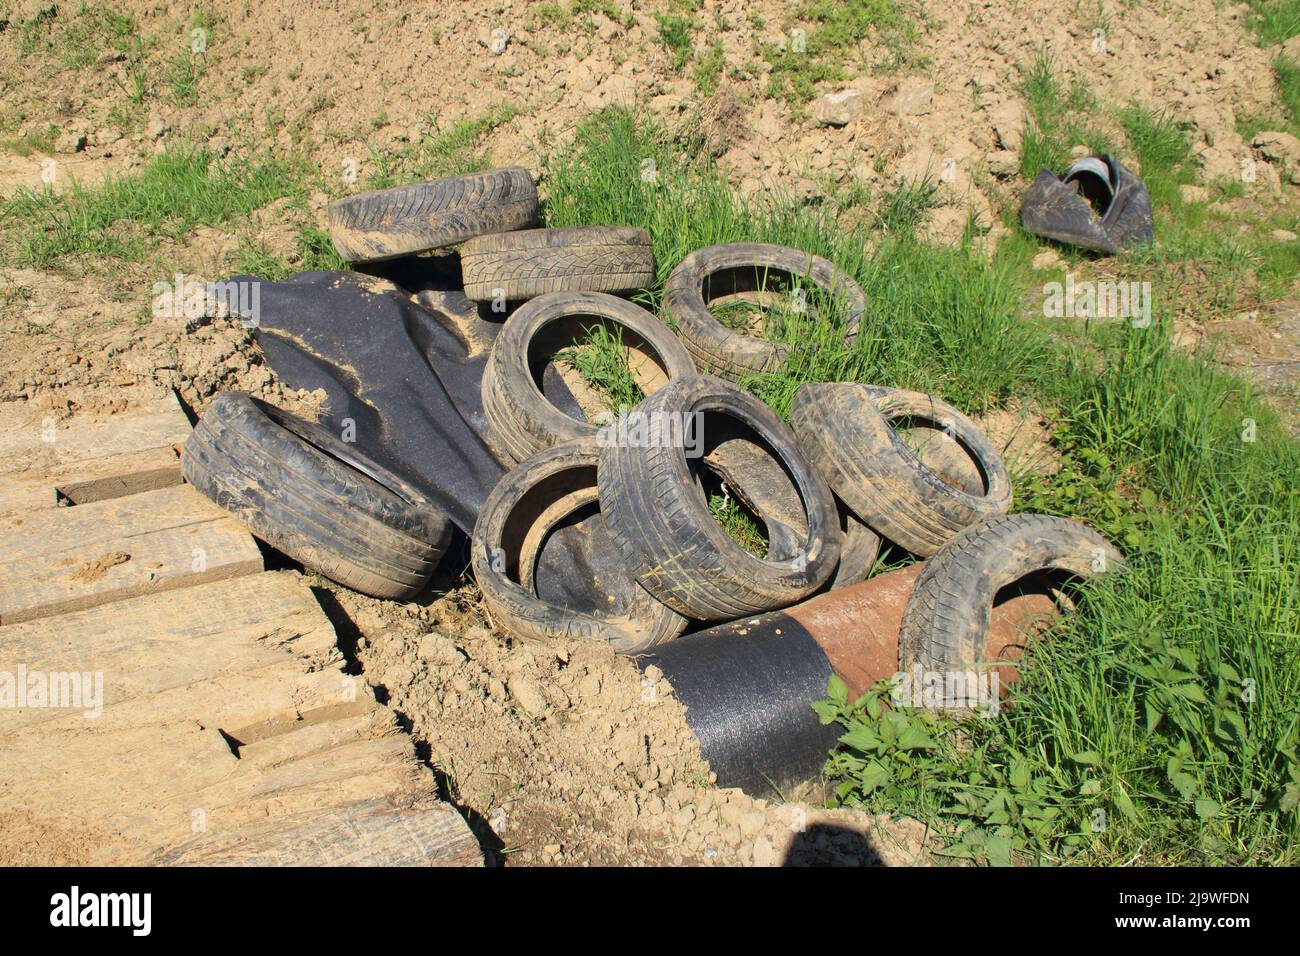 Old tires were dumped on a dirt road Stock Photo